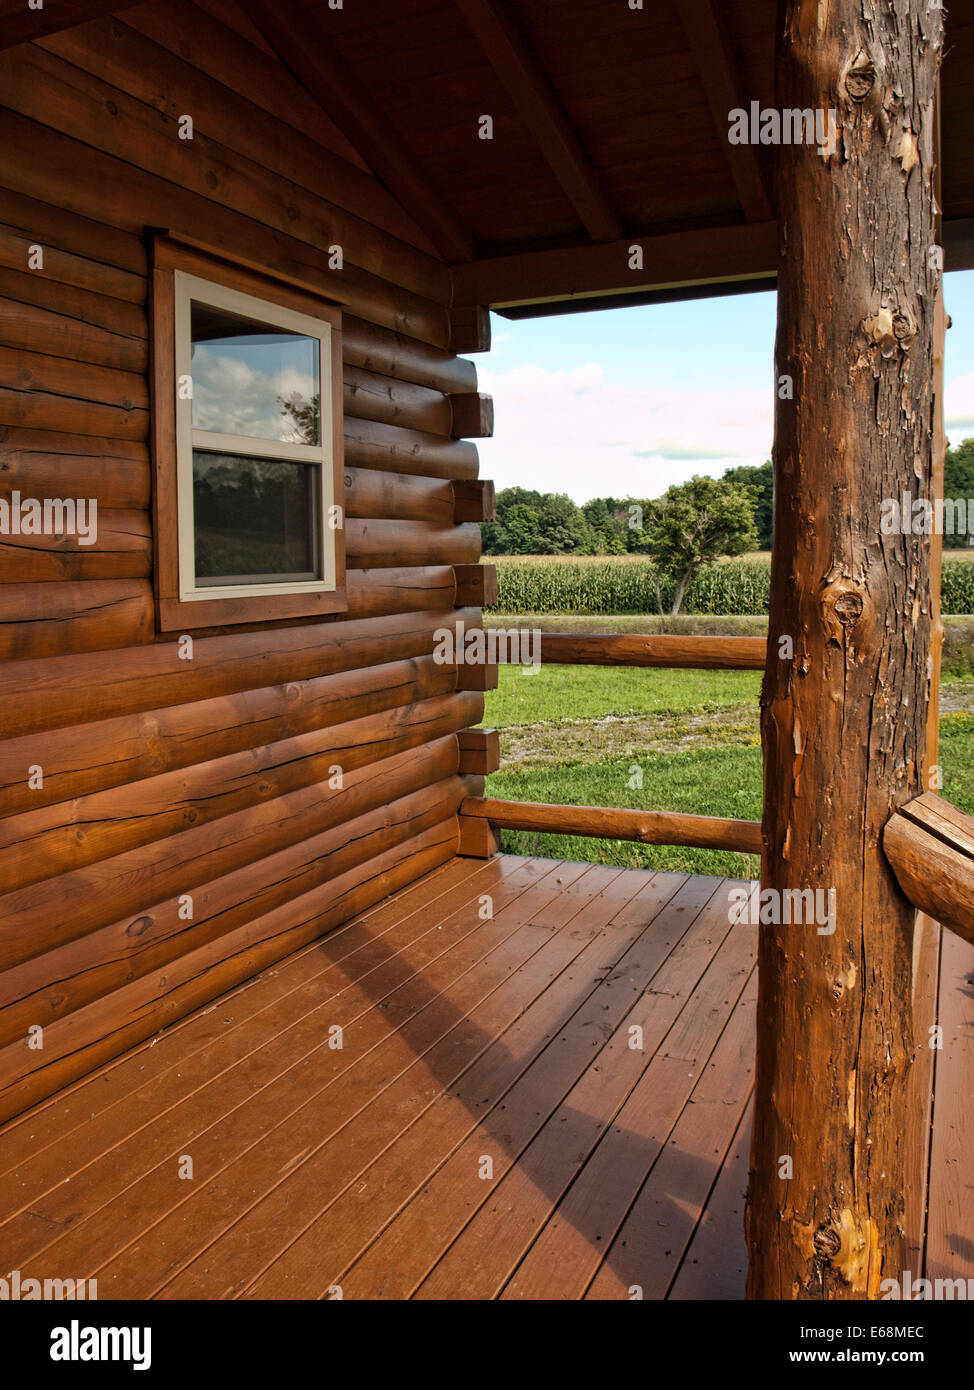 log cabin with view of a corn field Stock Photo